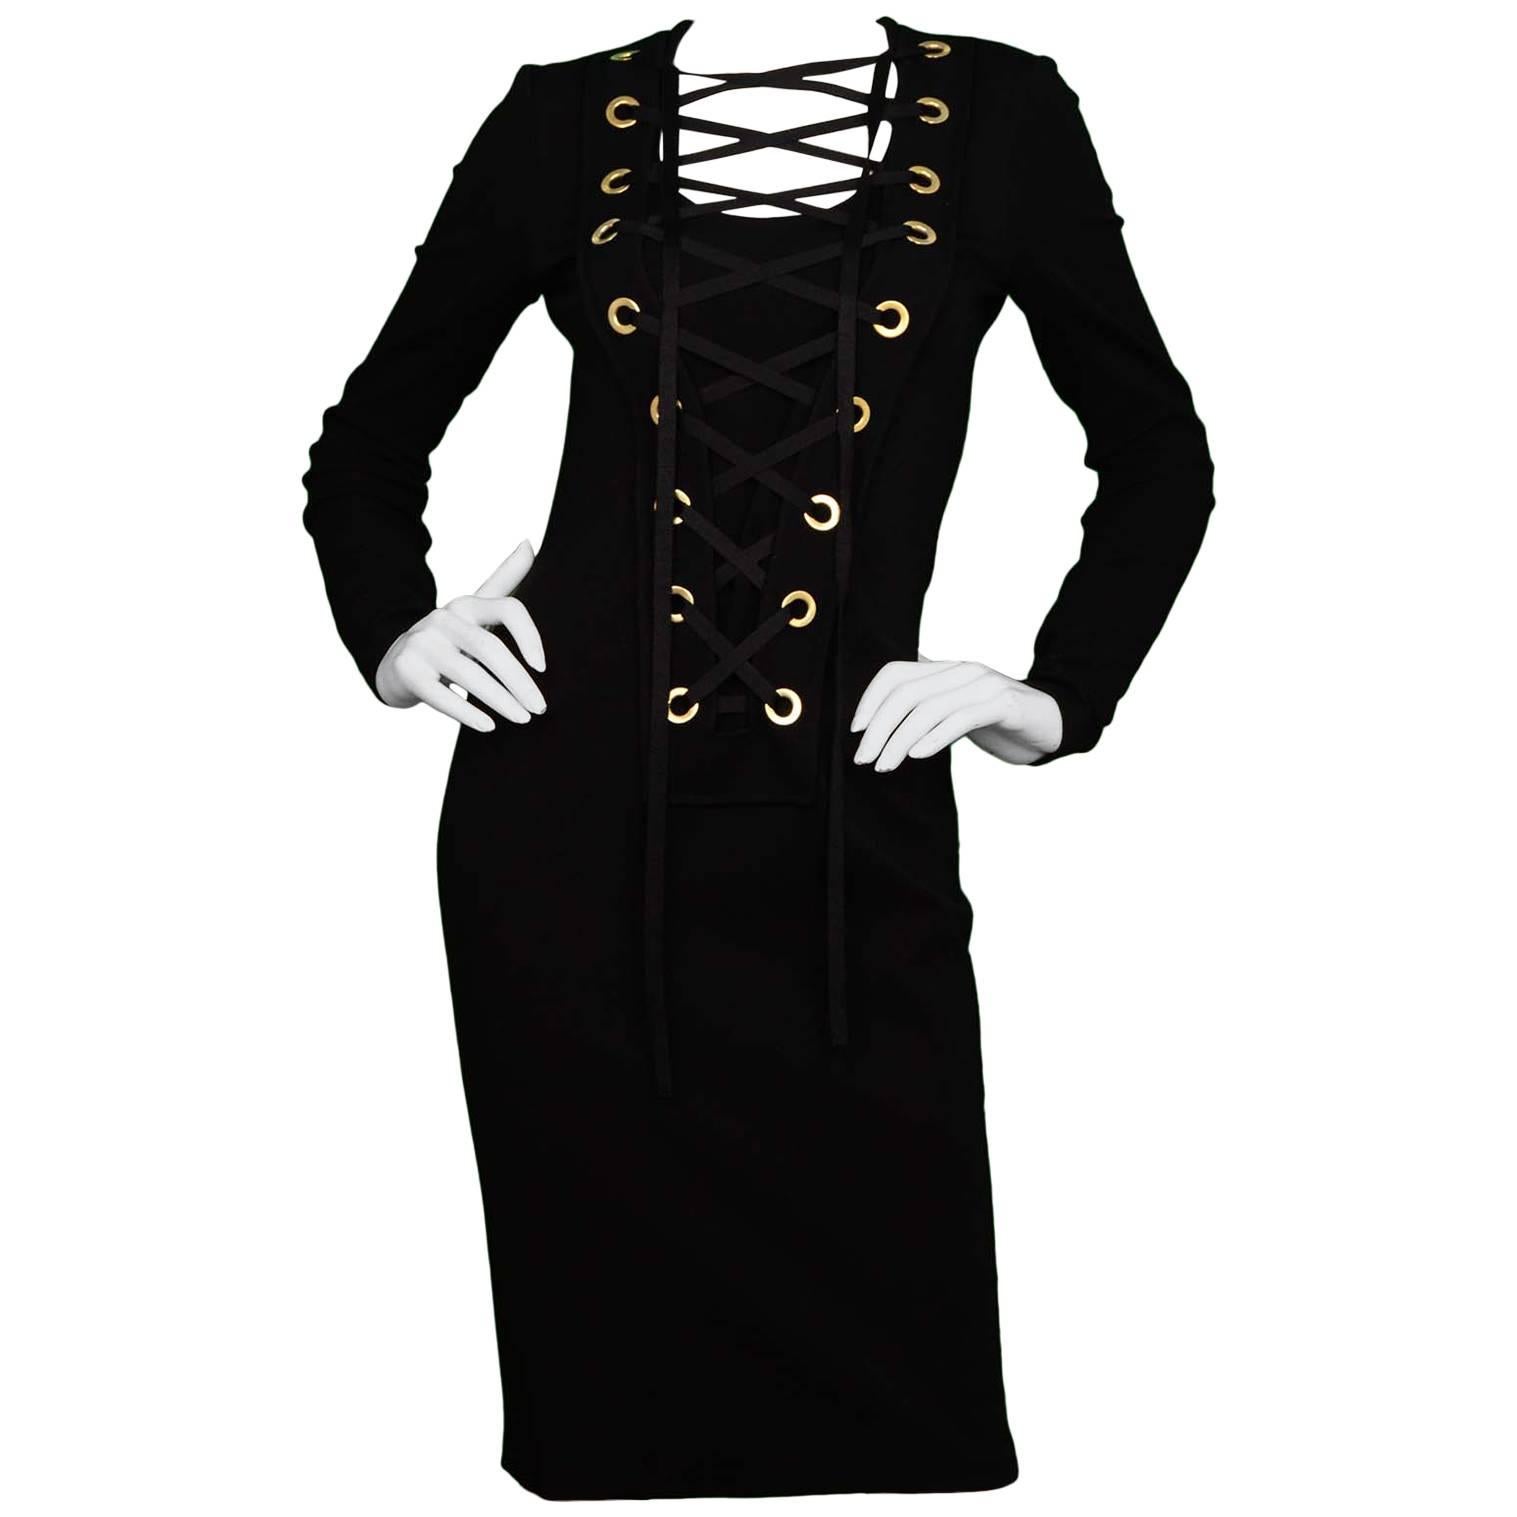 Givenchy NEW W/ TAGS 2016 Black Lace-Up Dress Sz 40 rt. $2, 580